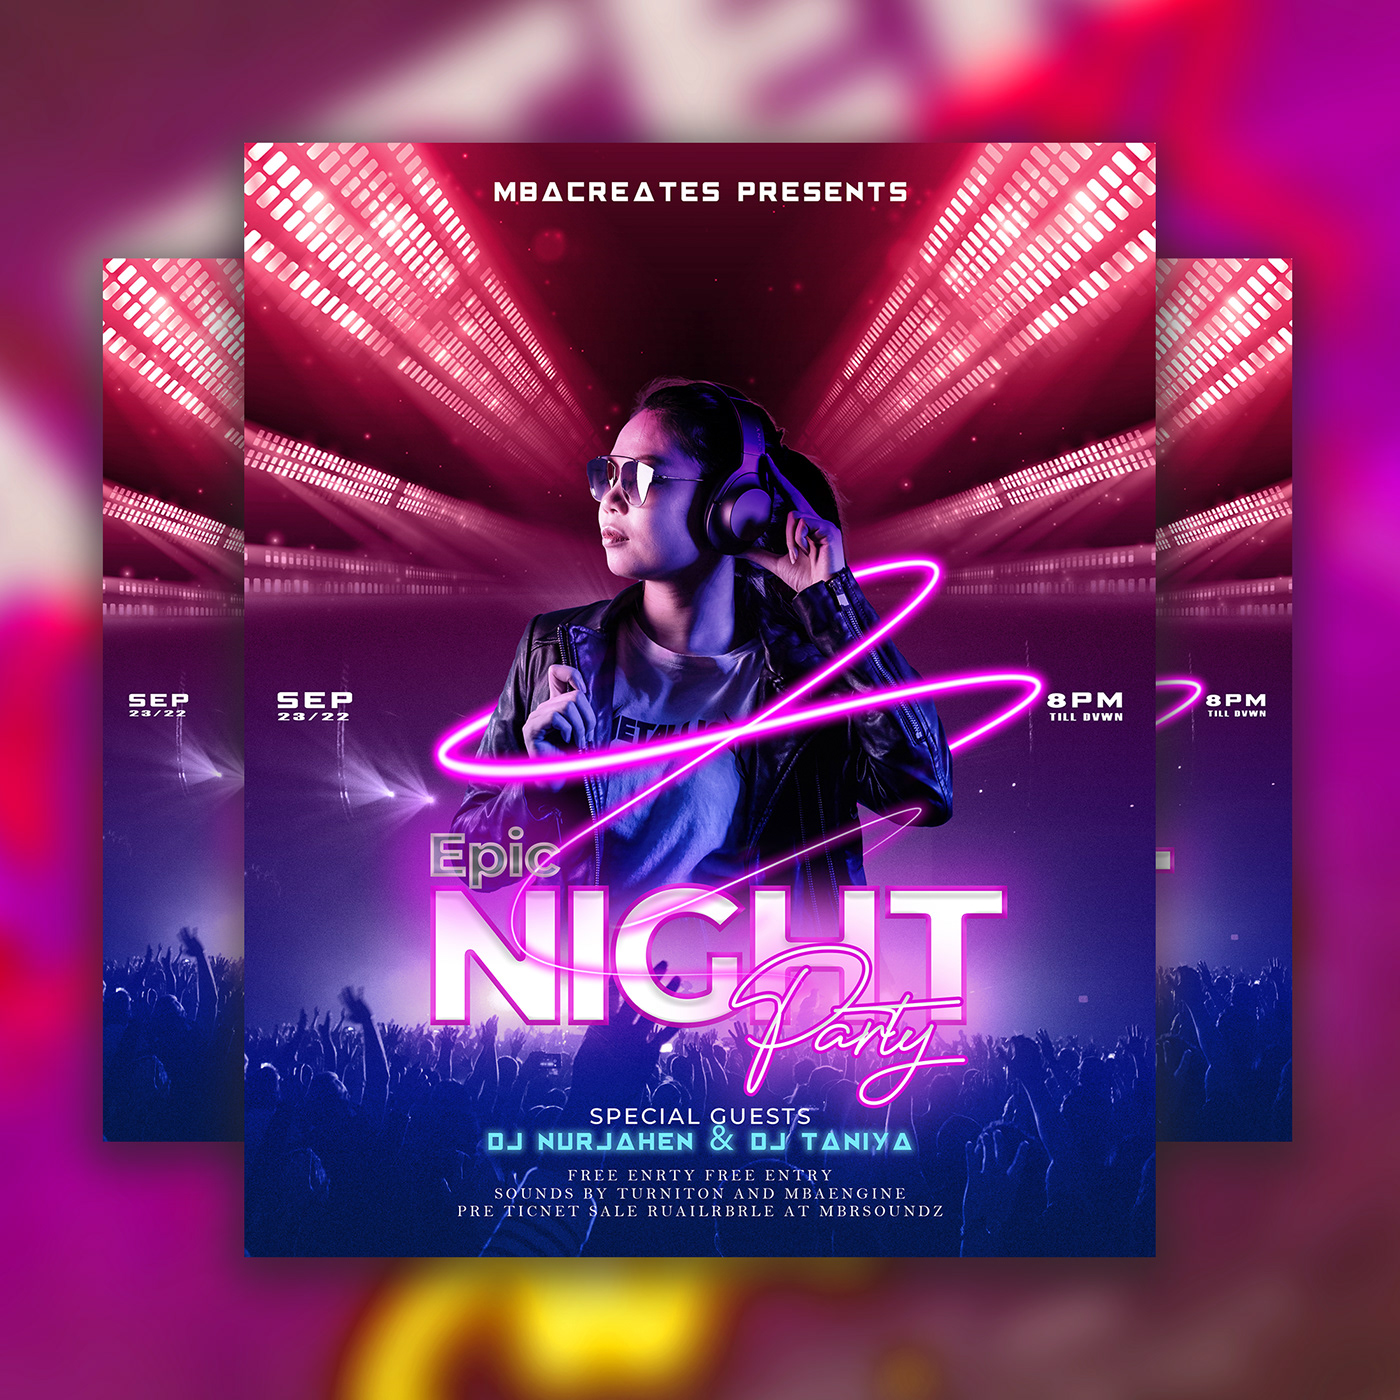 this is a new modern event dj night party flyer design